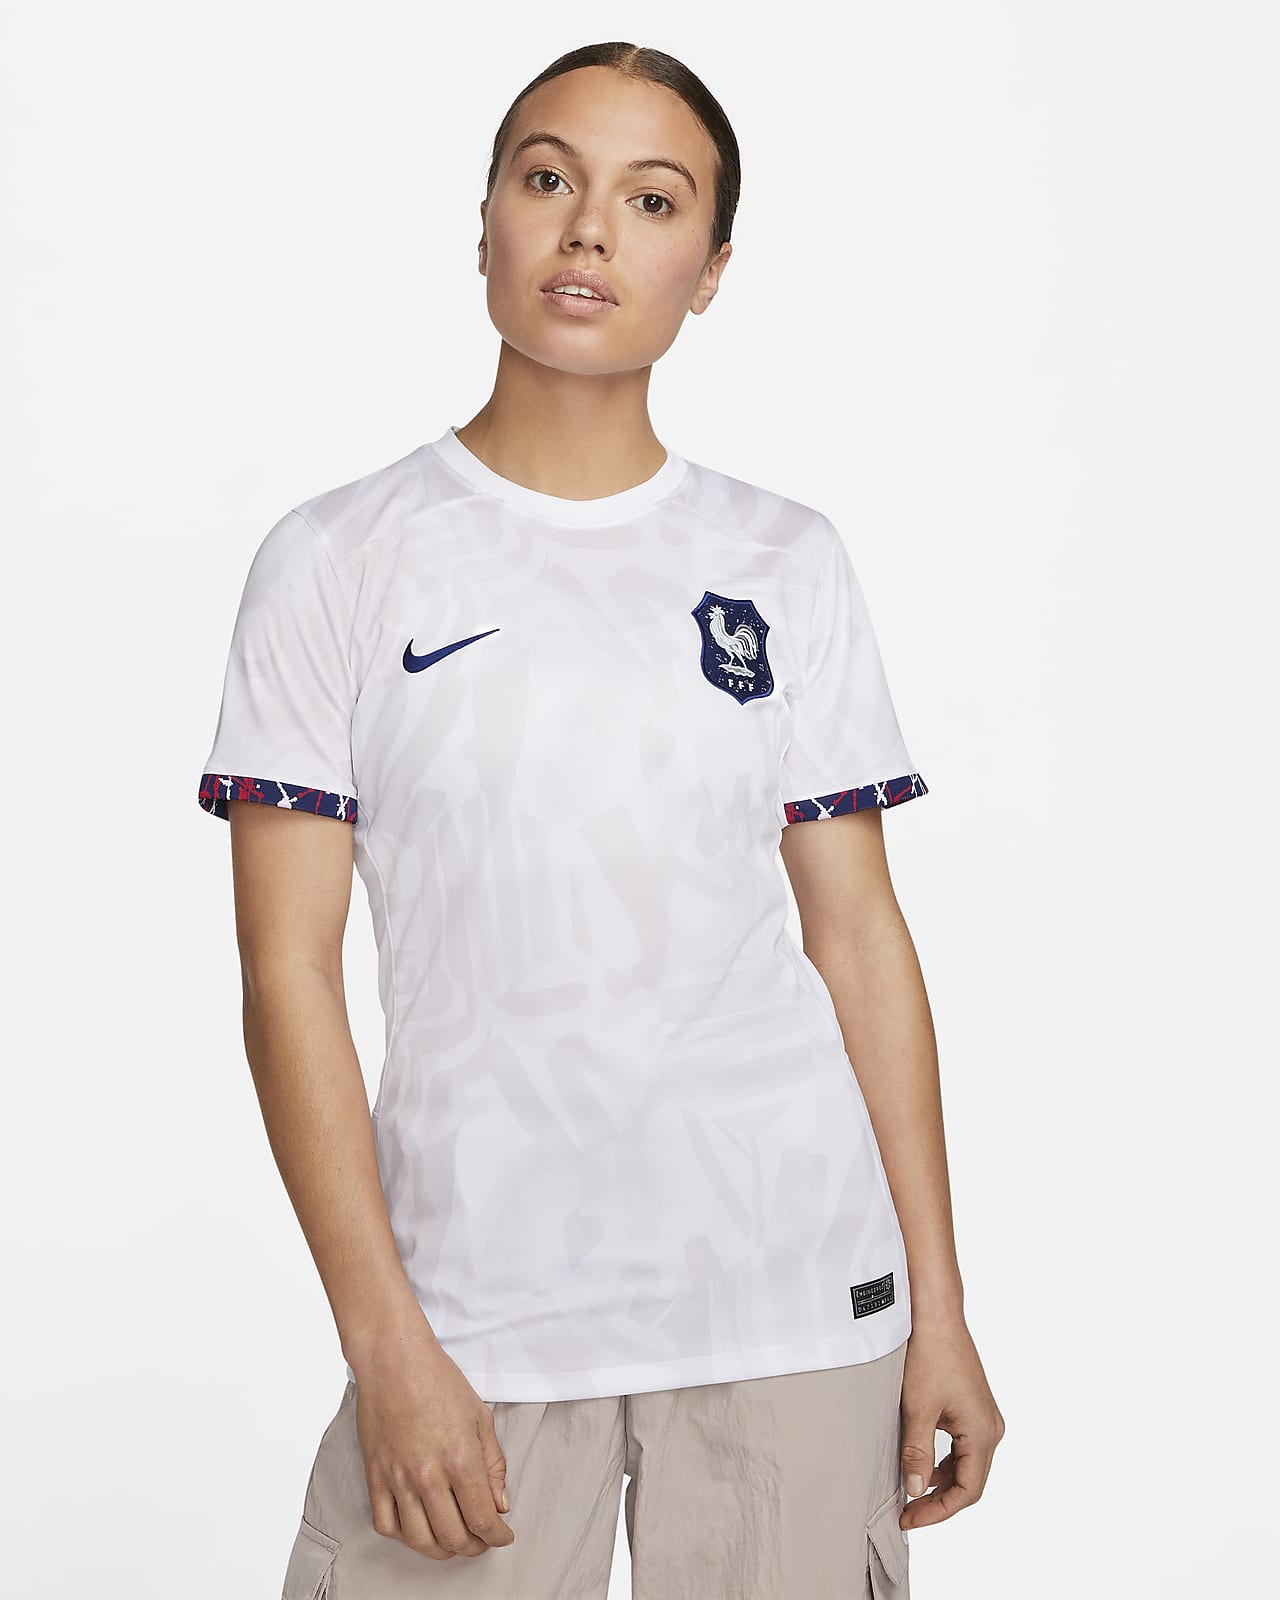 Lace Soccer Jersey – Versatile Forever